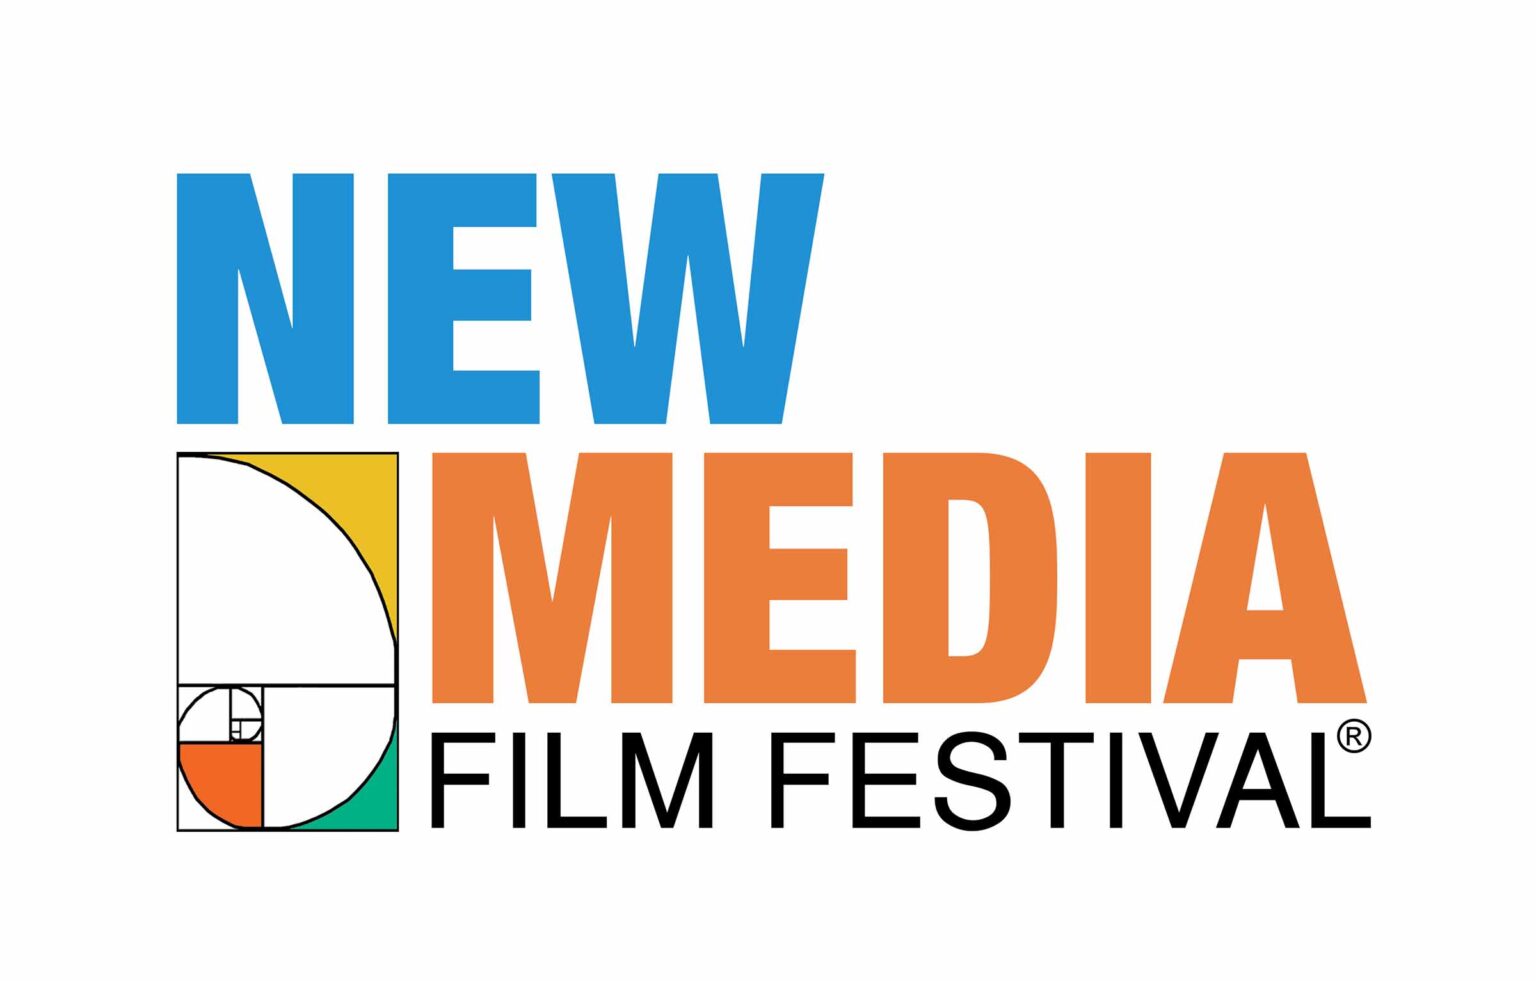 As the New Media Film Festival gets ready for its 2020 event, submissions for 2021 just opened up. Here's why this is one festival you don't want to miss.